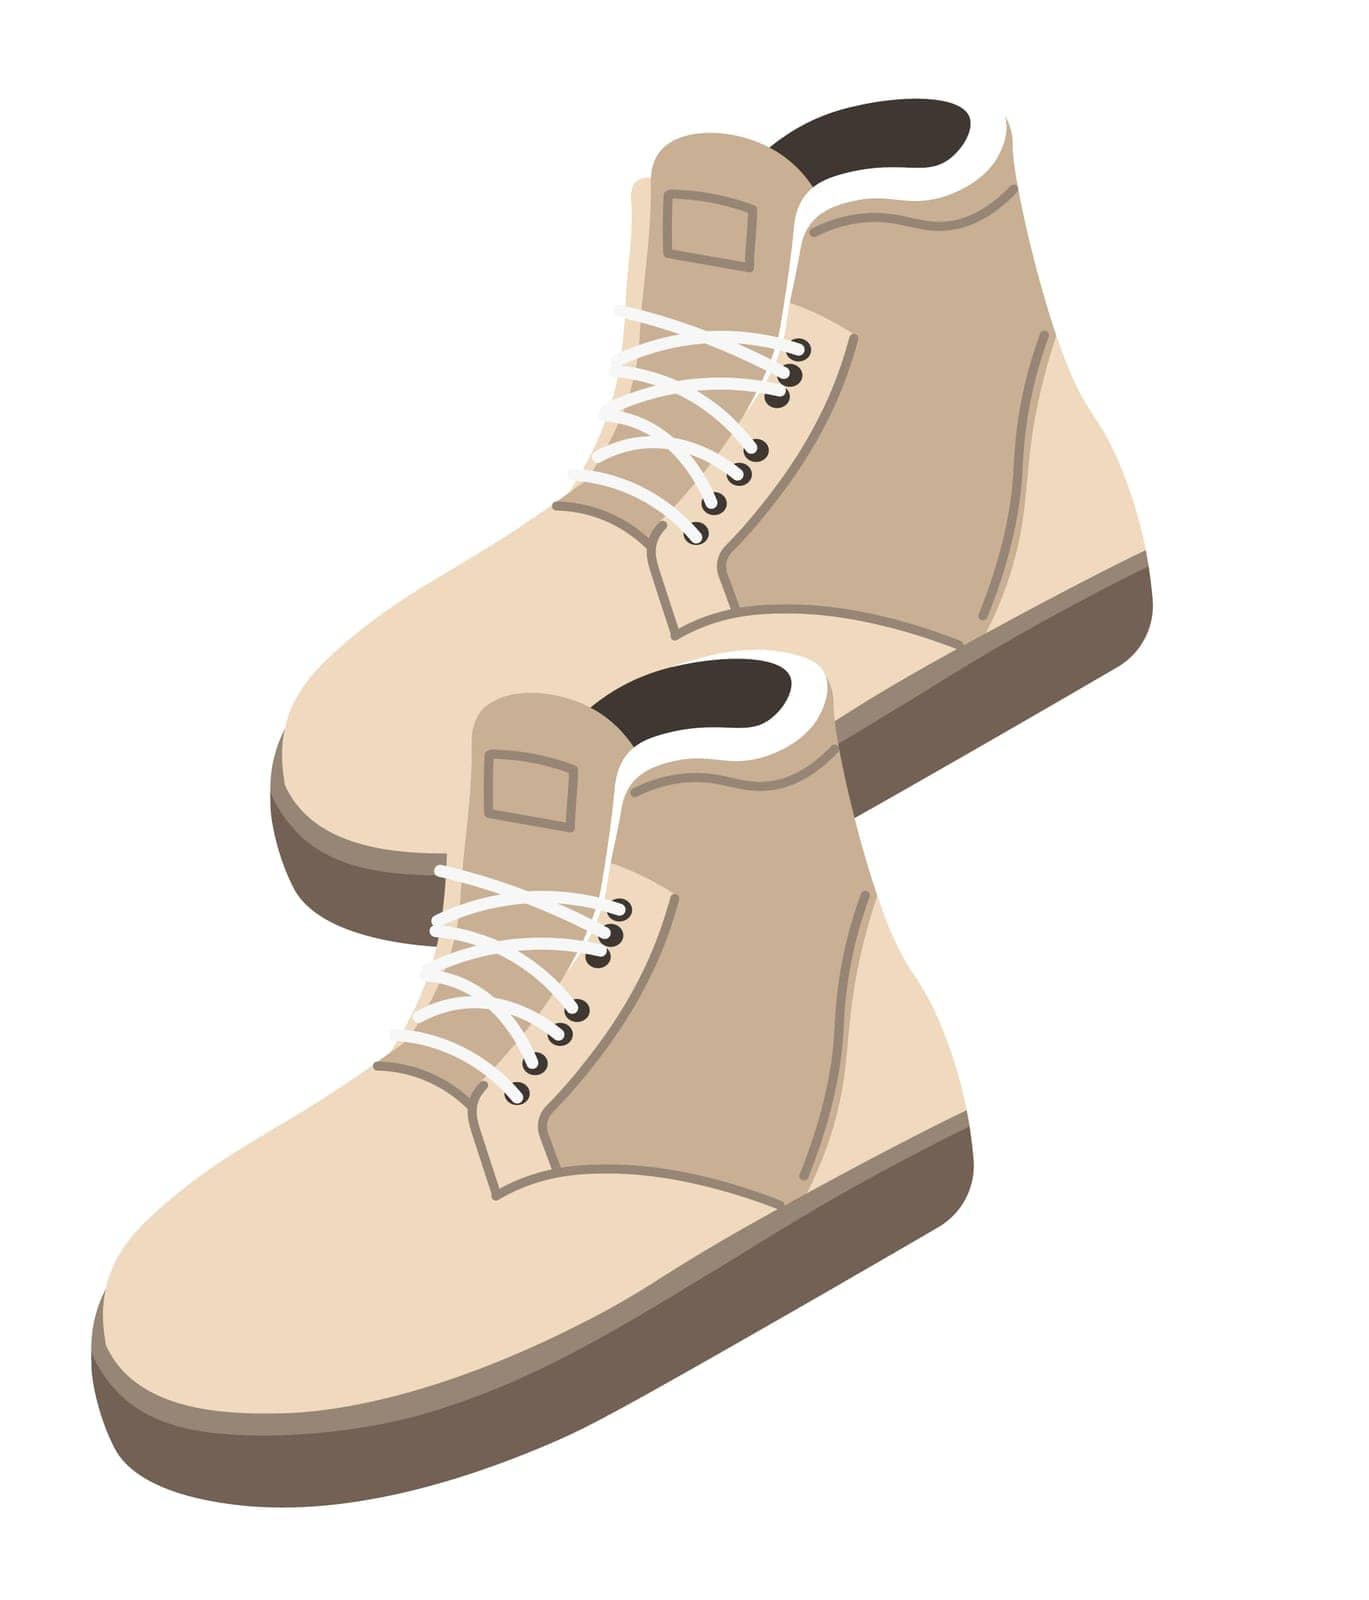 Fashionable footwear and clothes, isolated winter boots, stylish apparel and outfit element. Shoes with laces, made of leather. Autumn clothing and accessories for outerwear. Vector in flat style